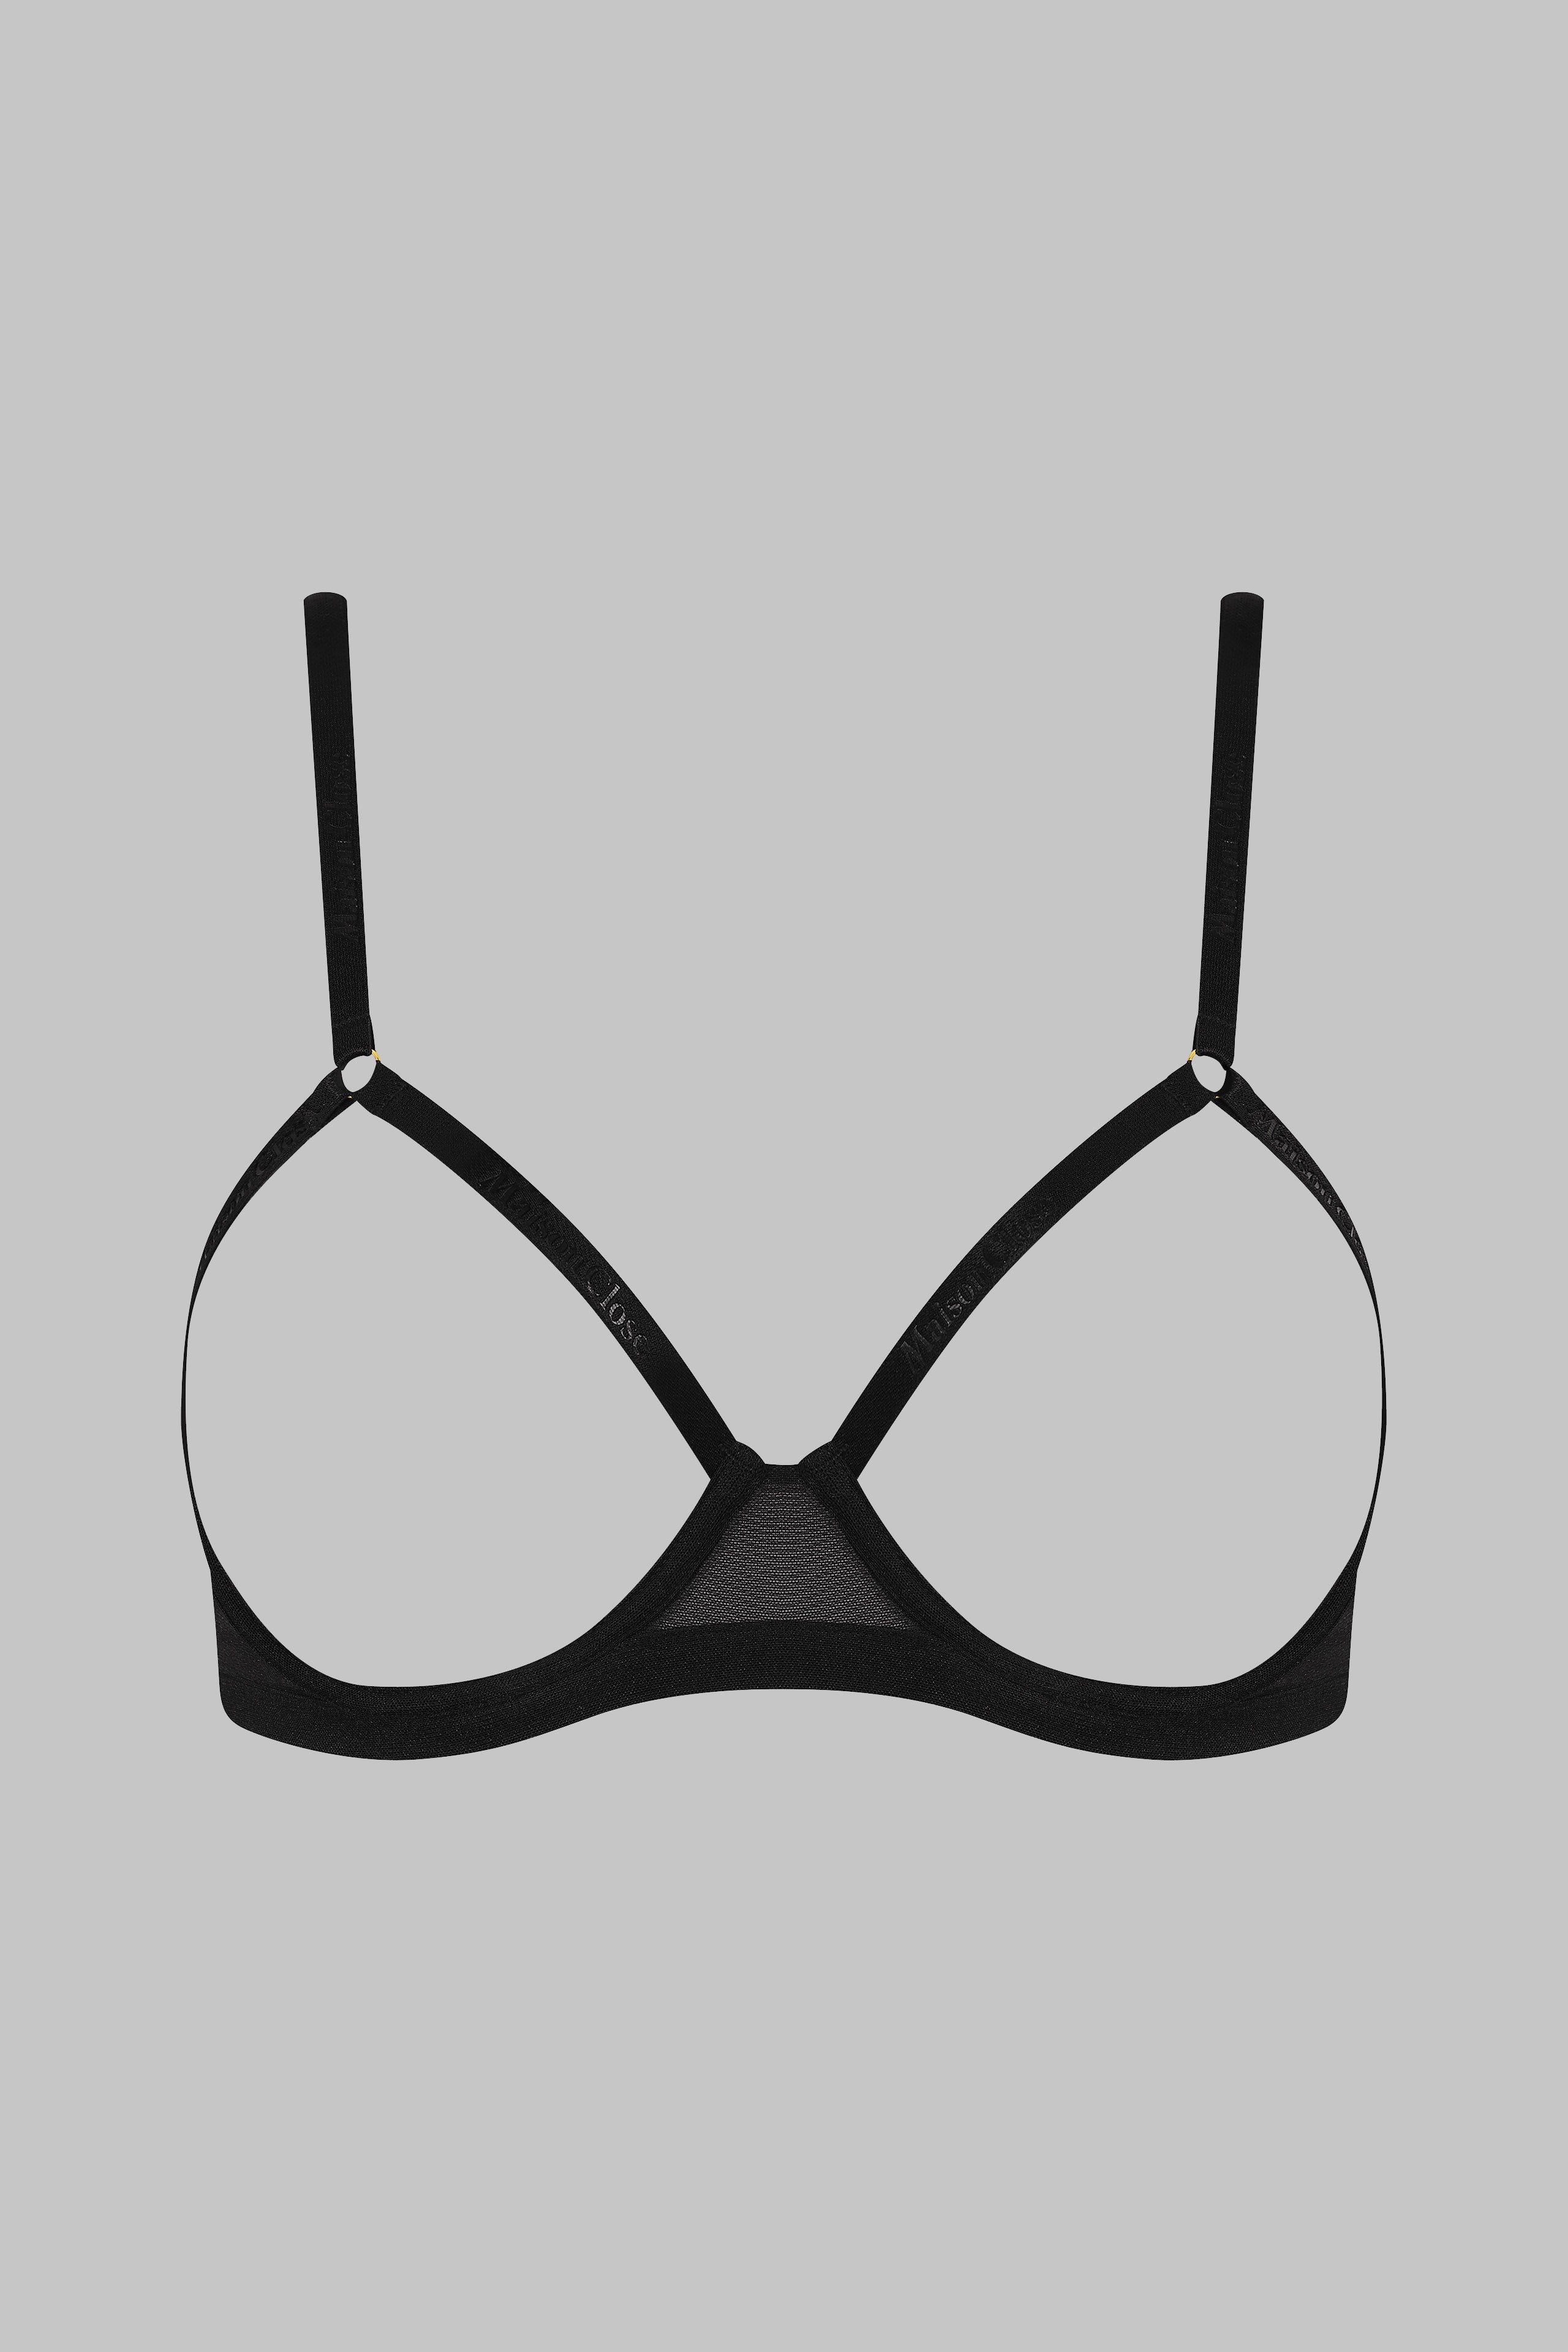 naked-breast-bra-corps-a-corps-neon-black-gold-maison-close